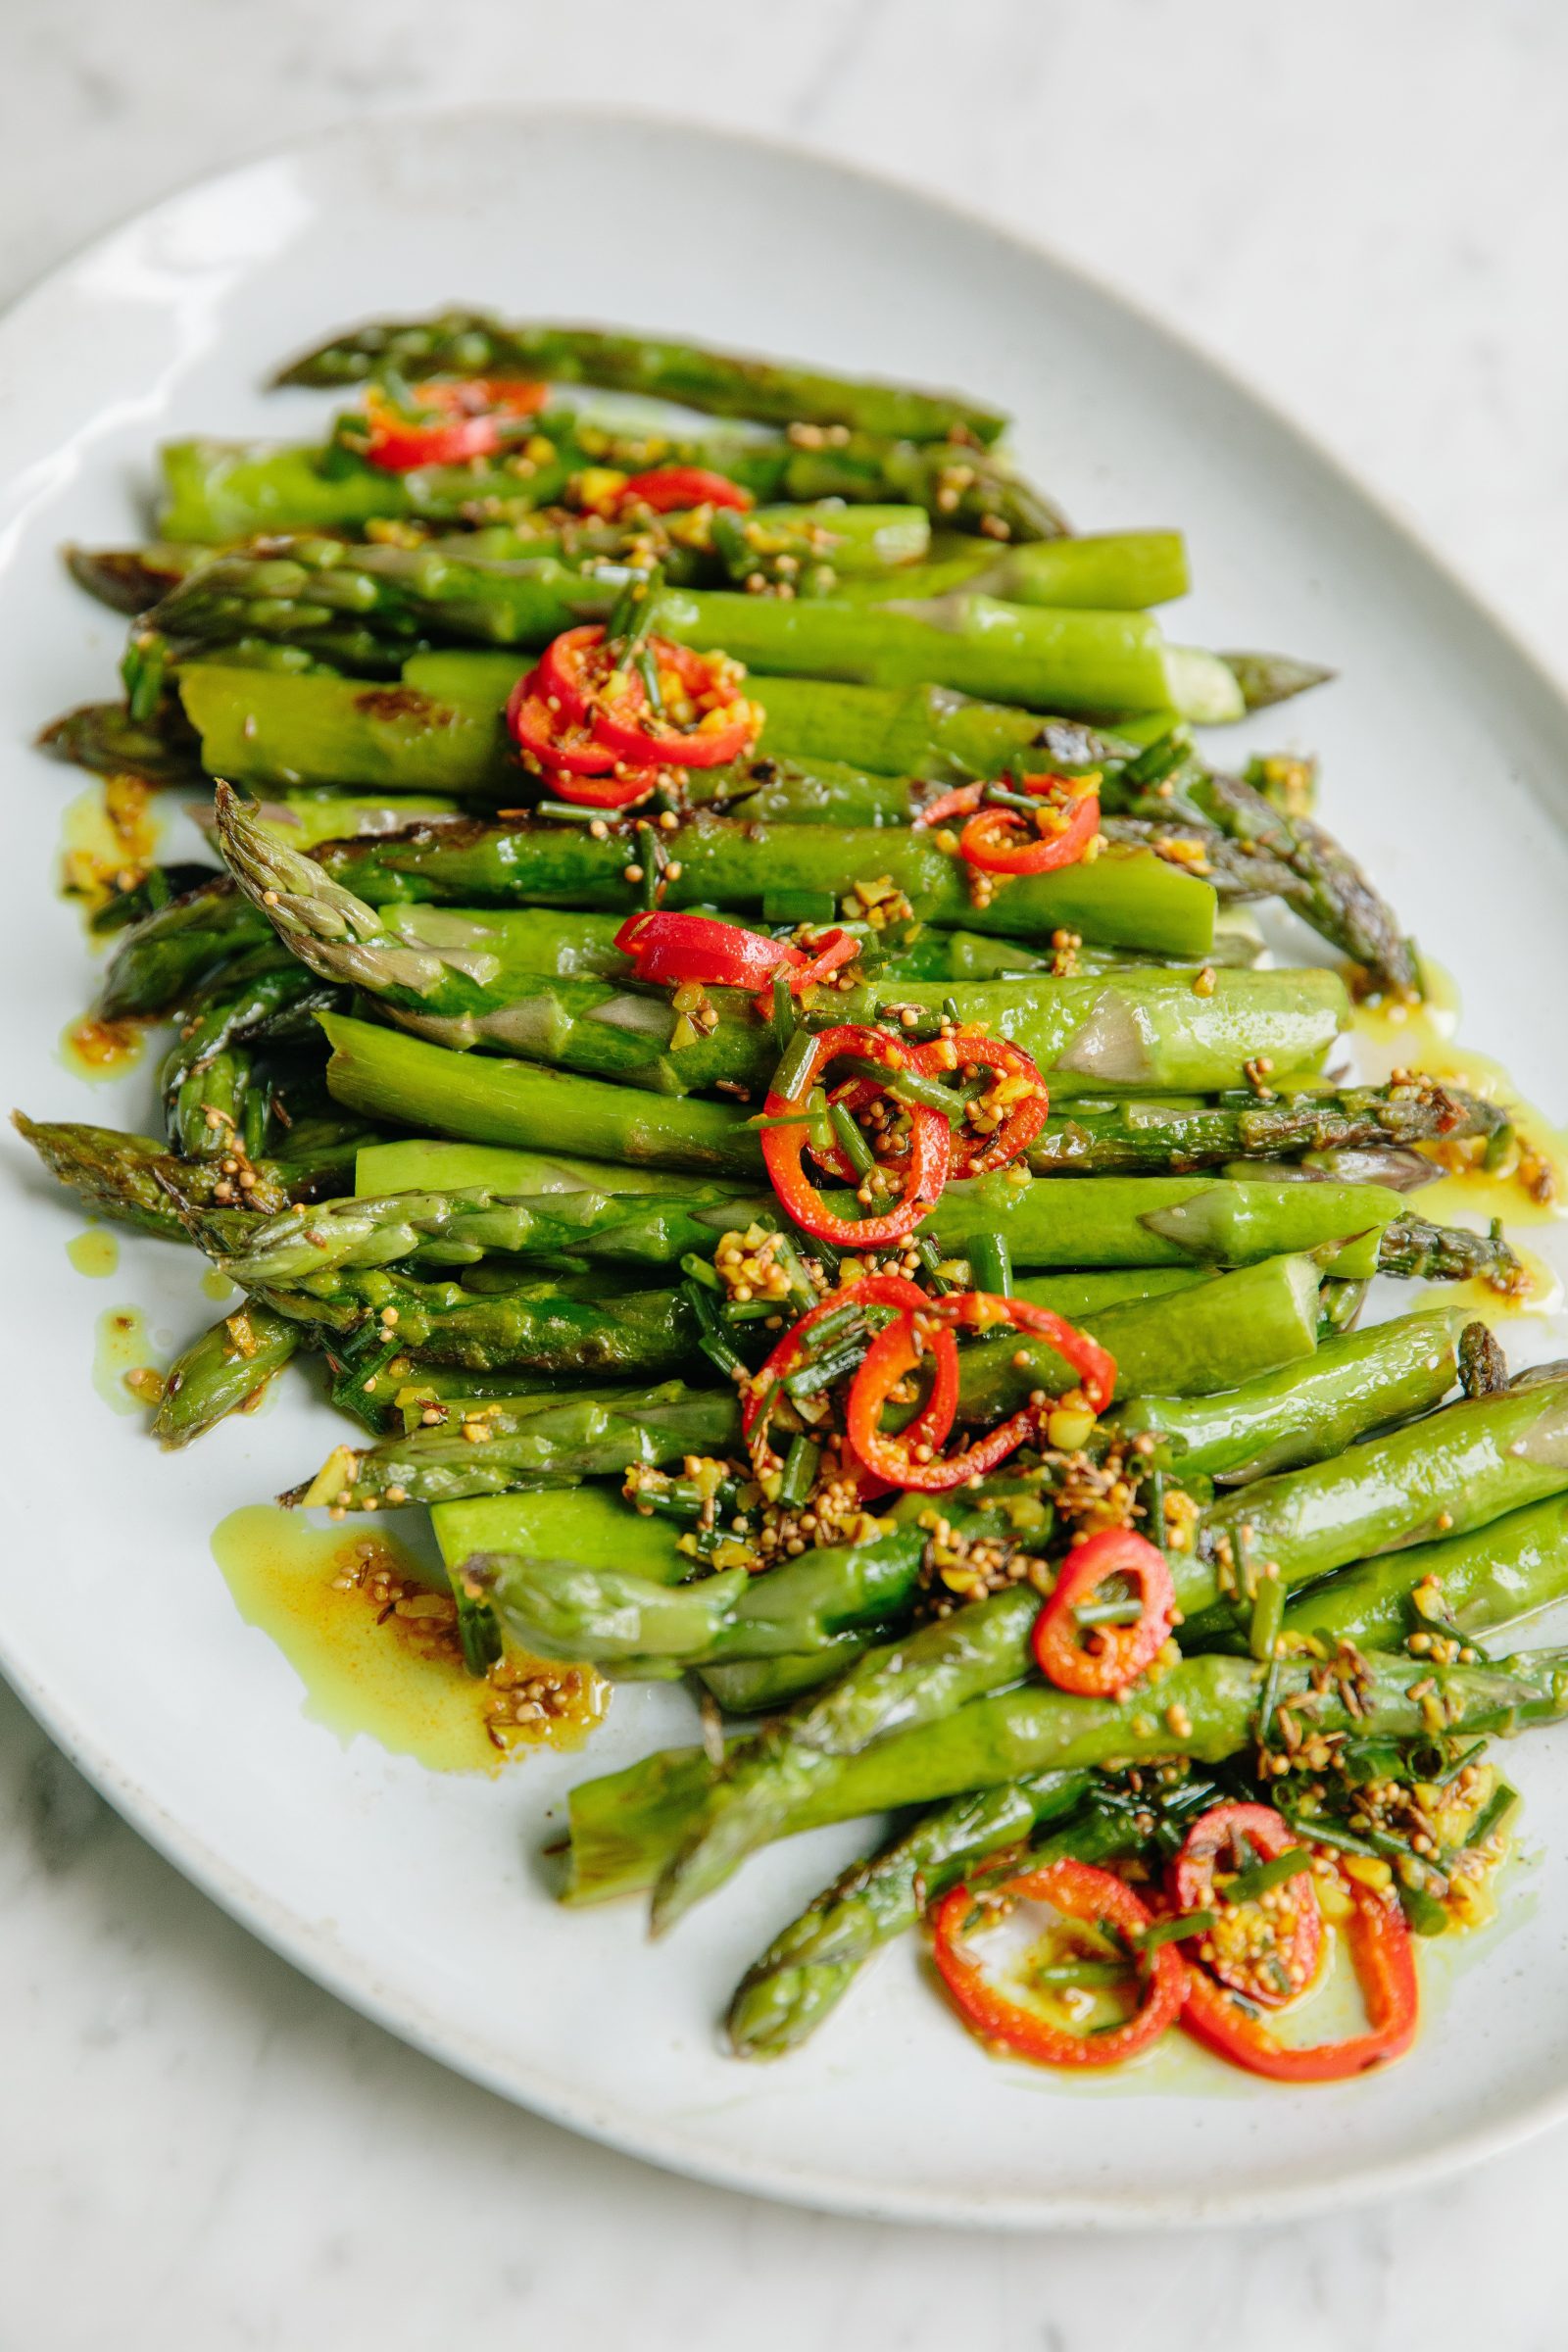 pan-roasted-asparagus-spiced-oil-chives